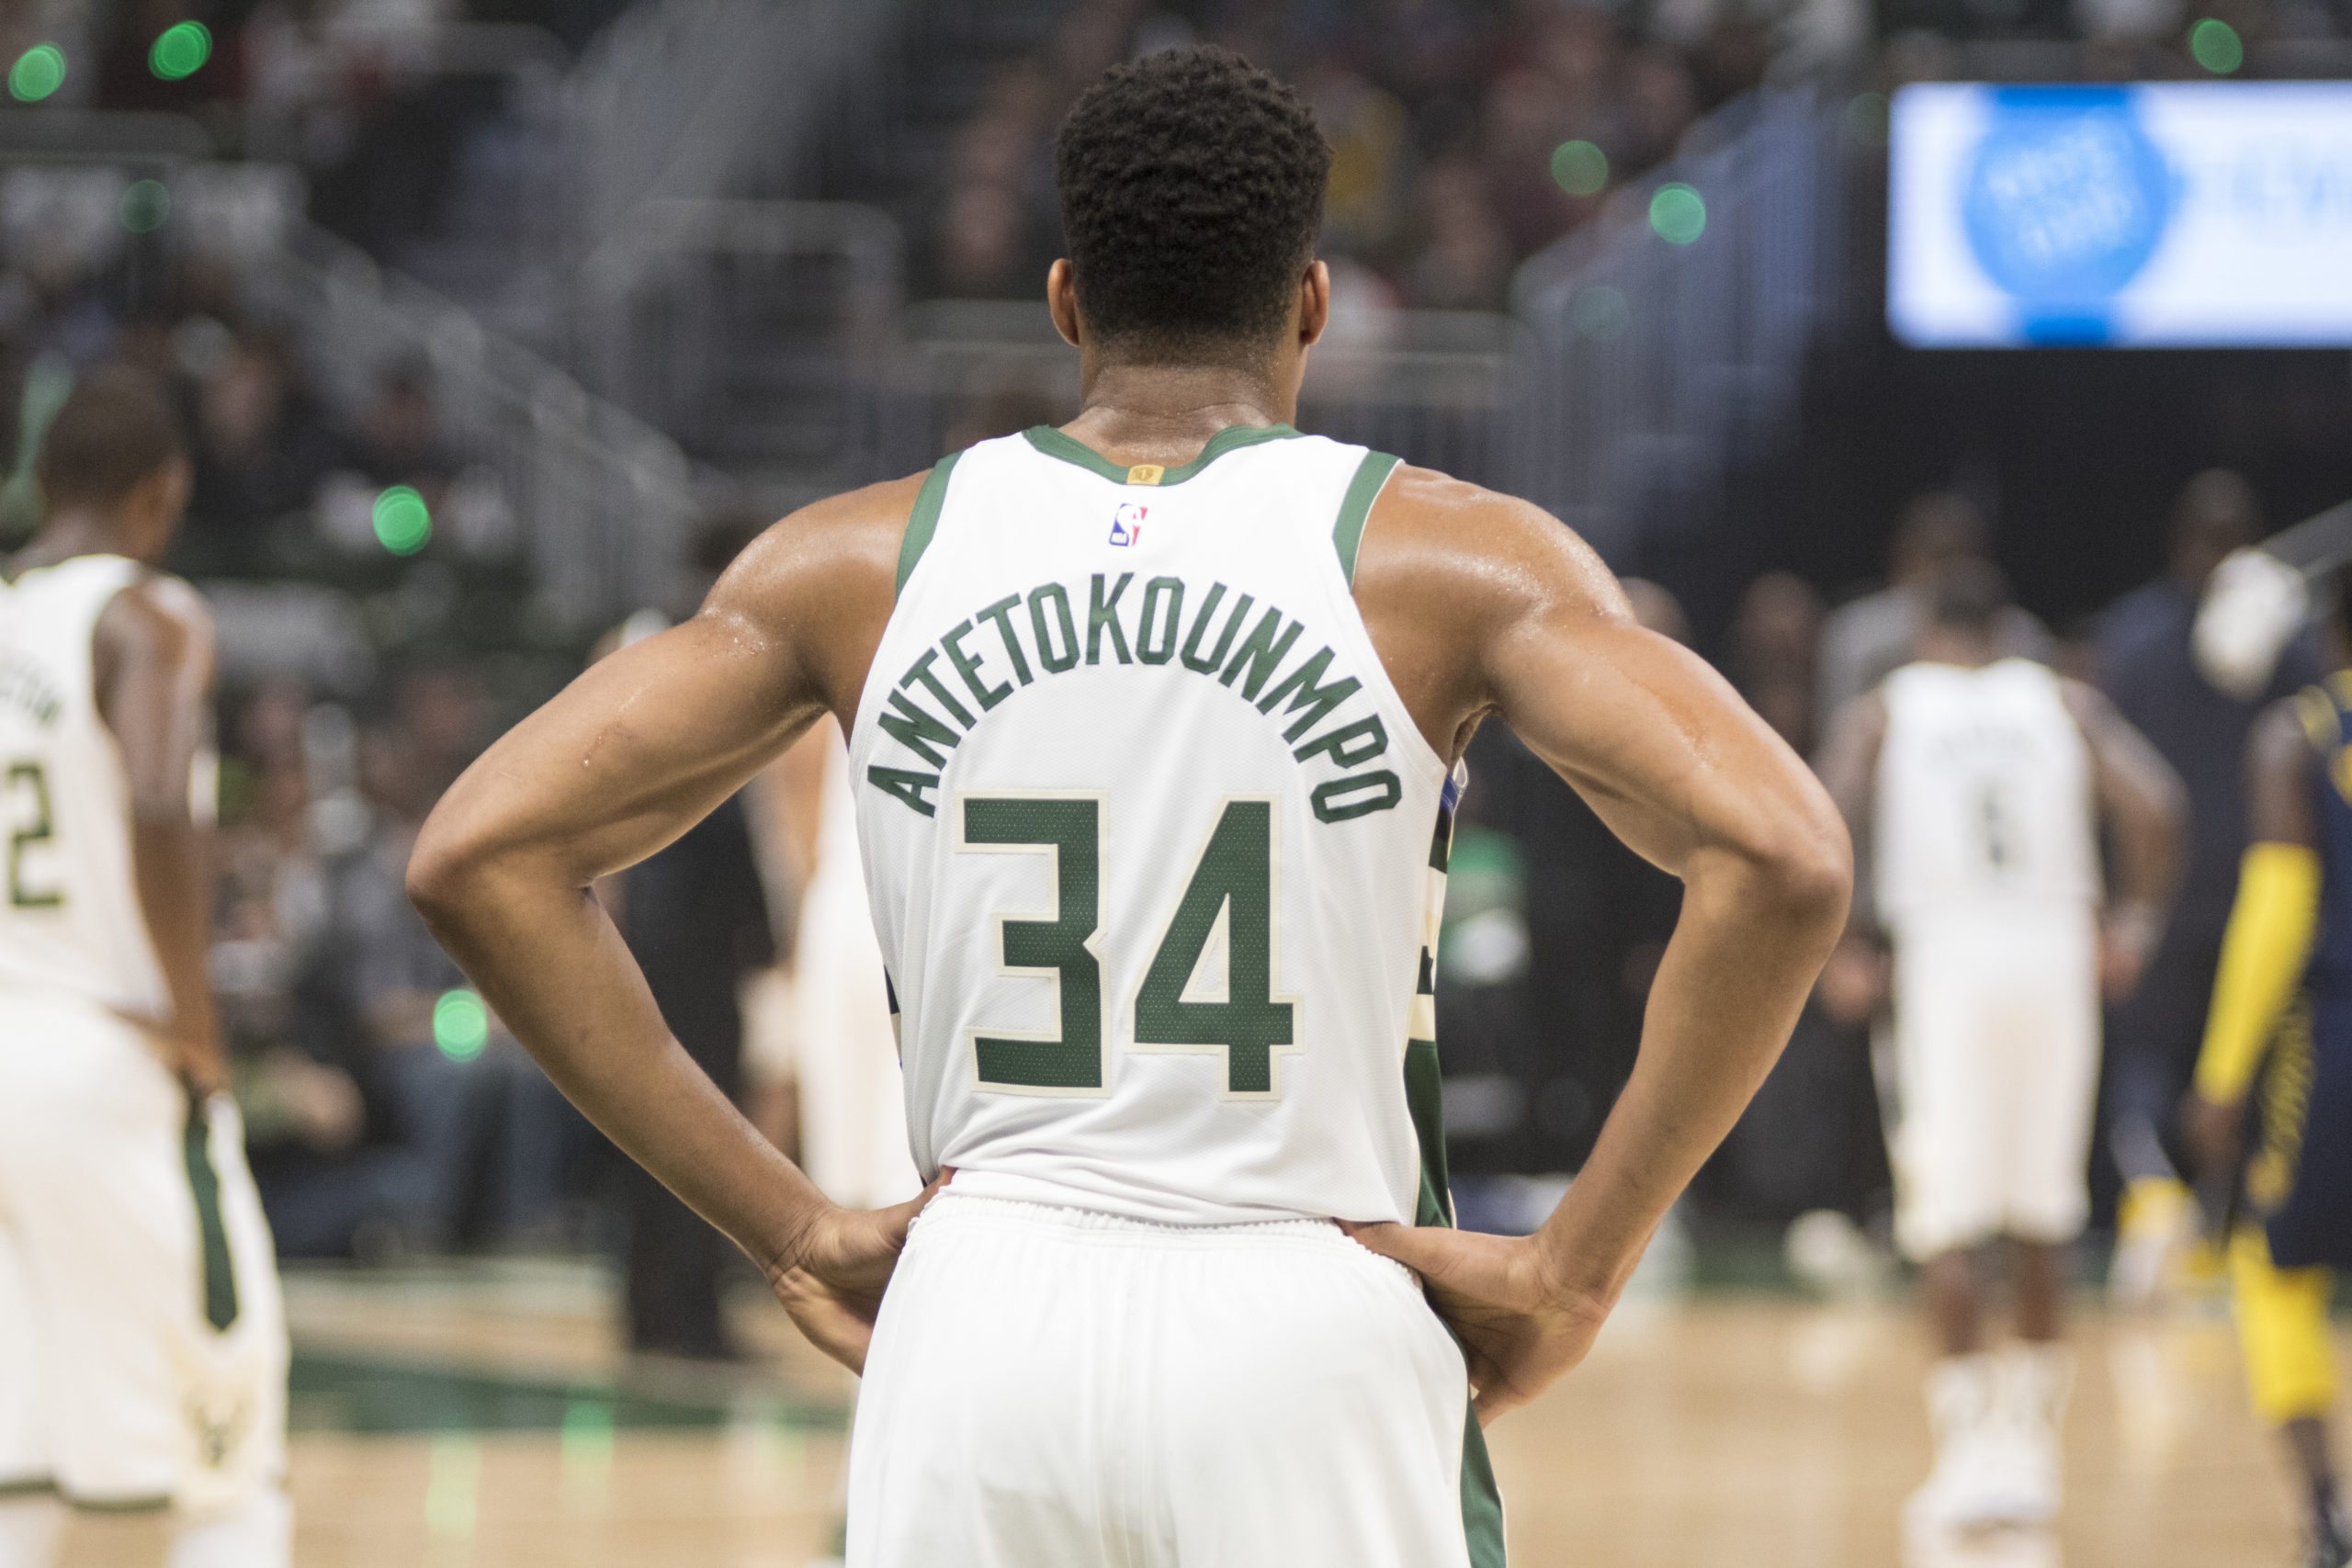 Three Antetokounmpo brothers share NBA court for first time